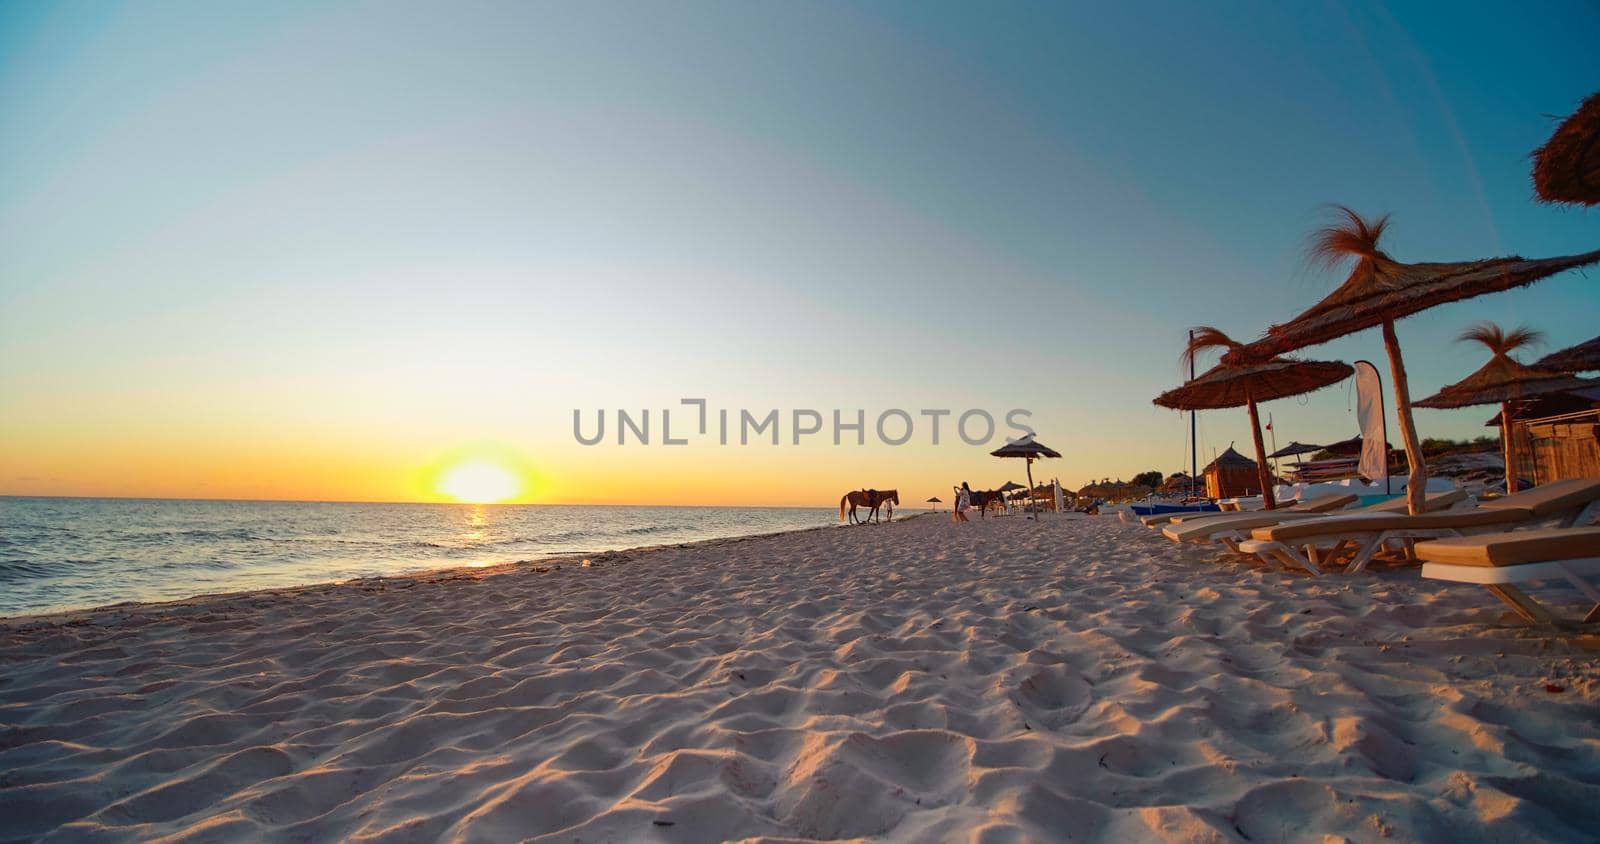 Beach resort with reed umbrella, holiday concept by RecCameraStock